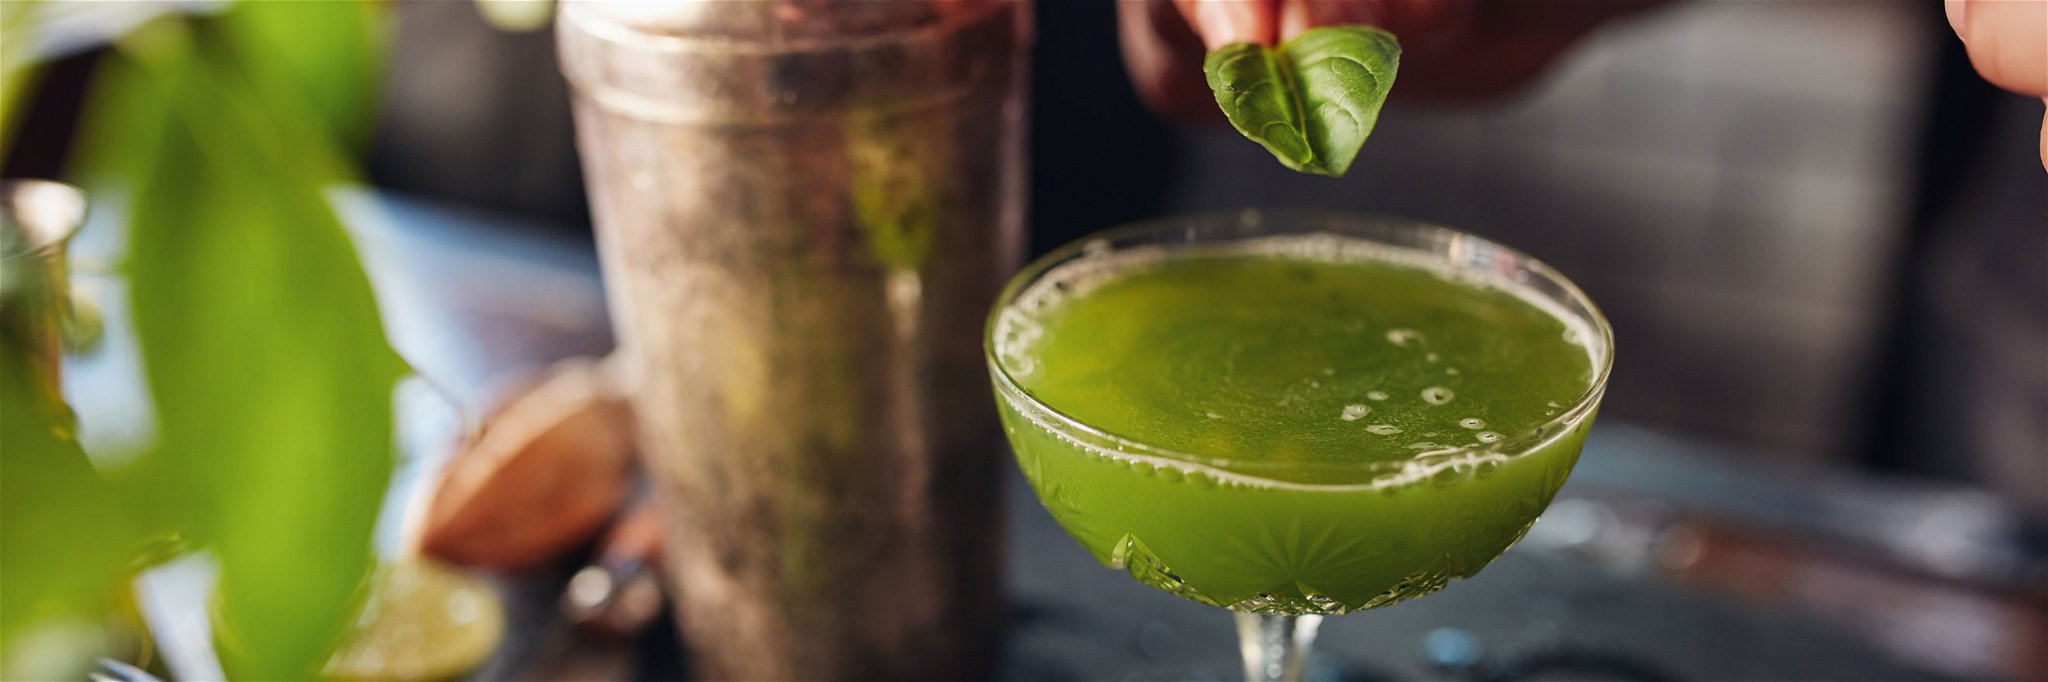 Cocktail Recipes with Mint, Basil and Coriander